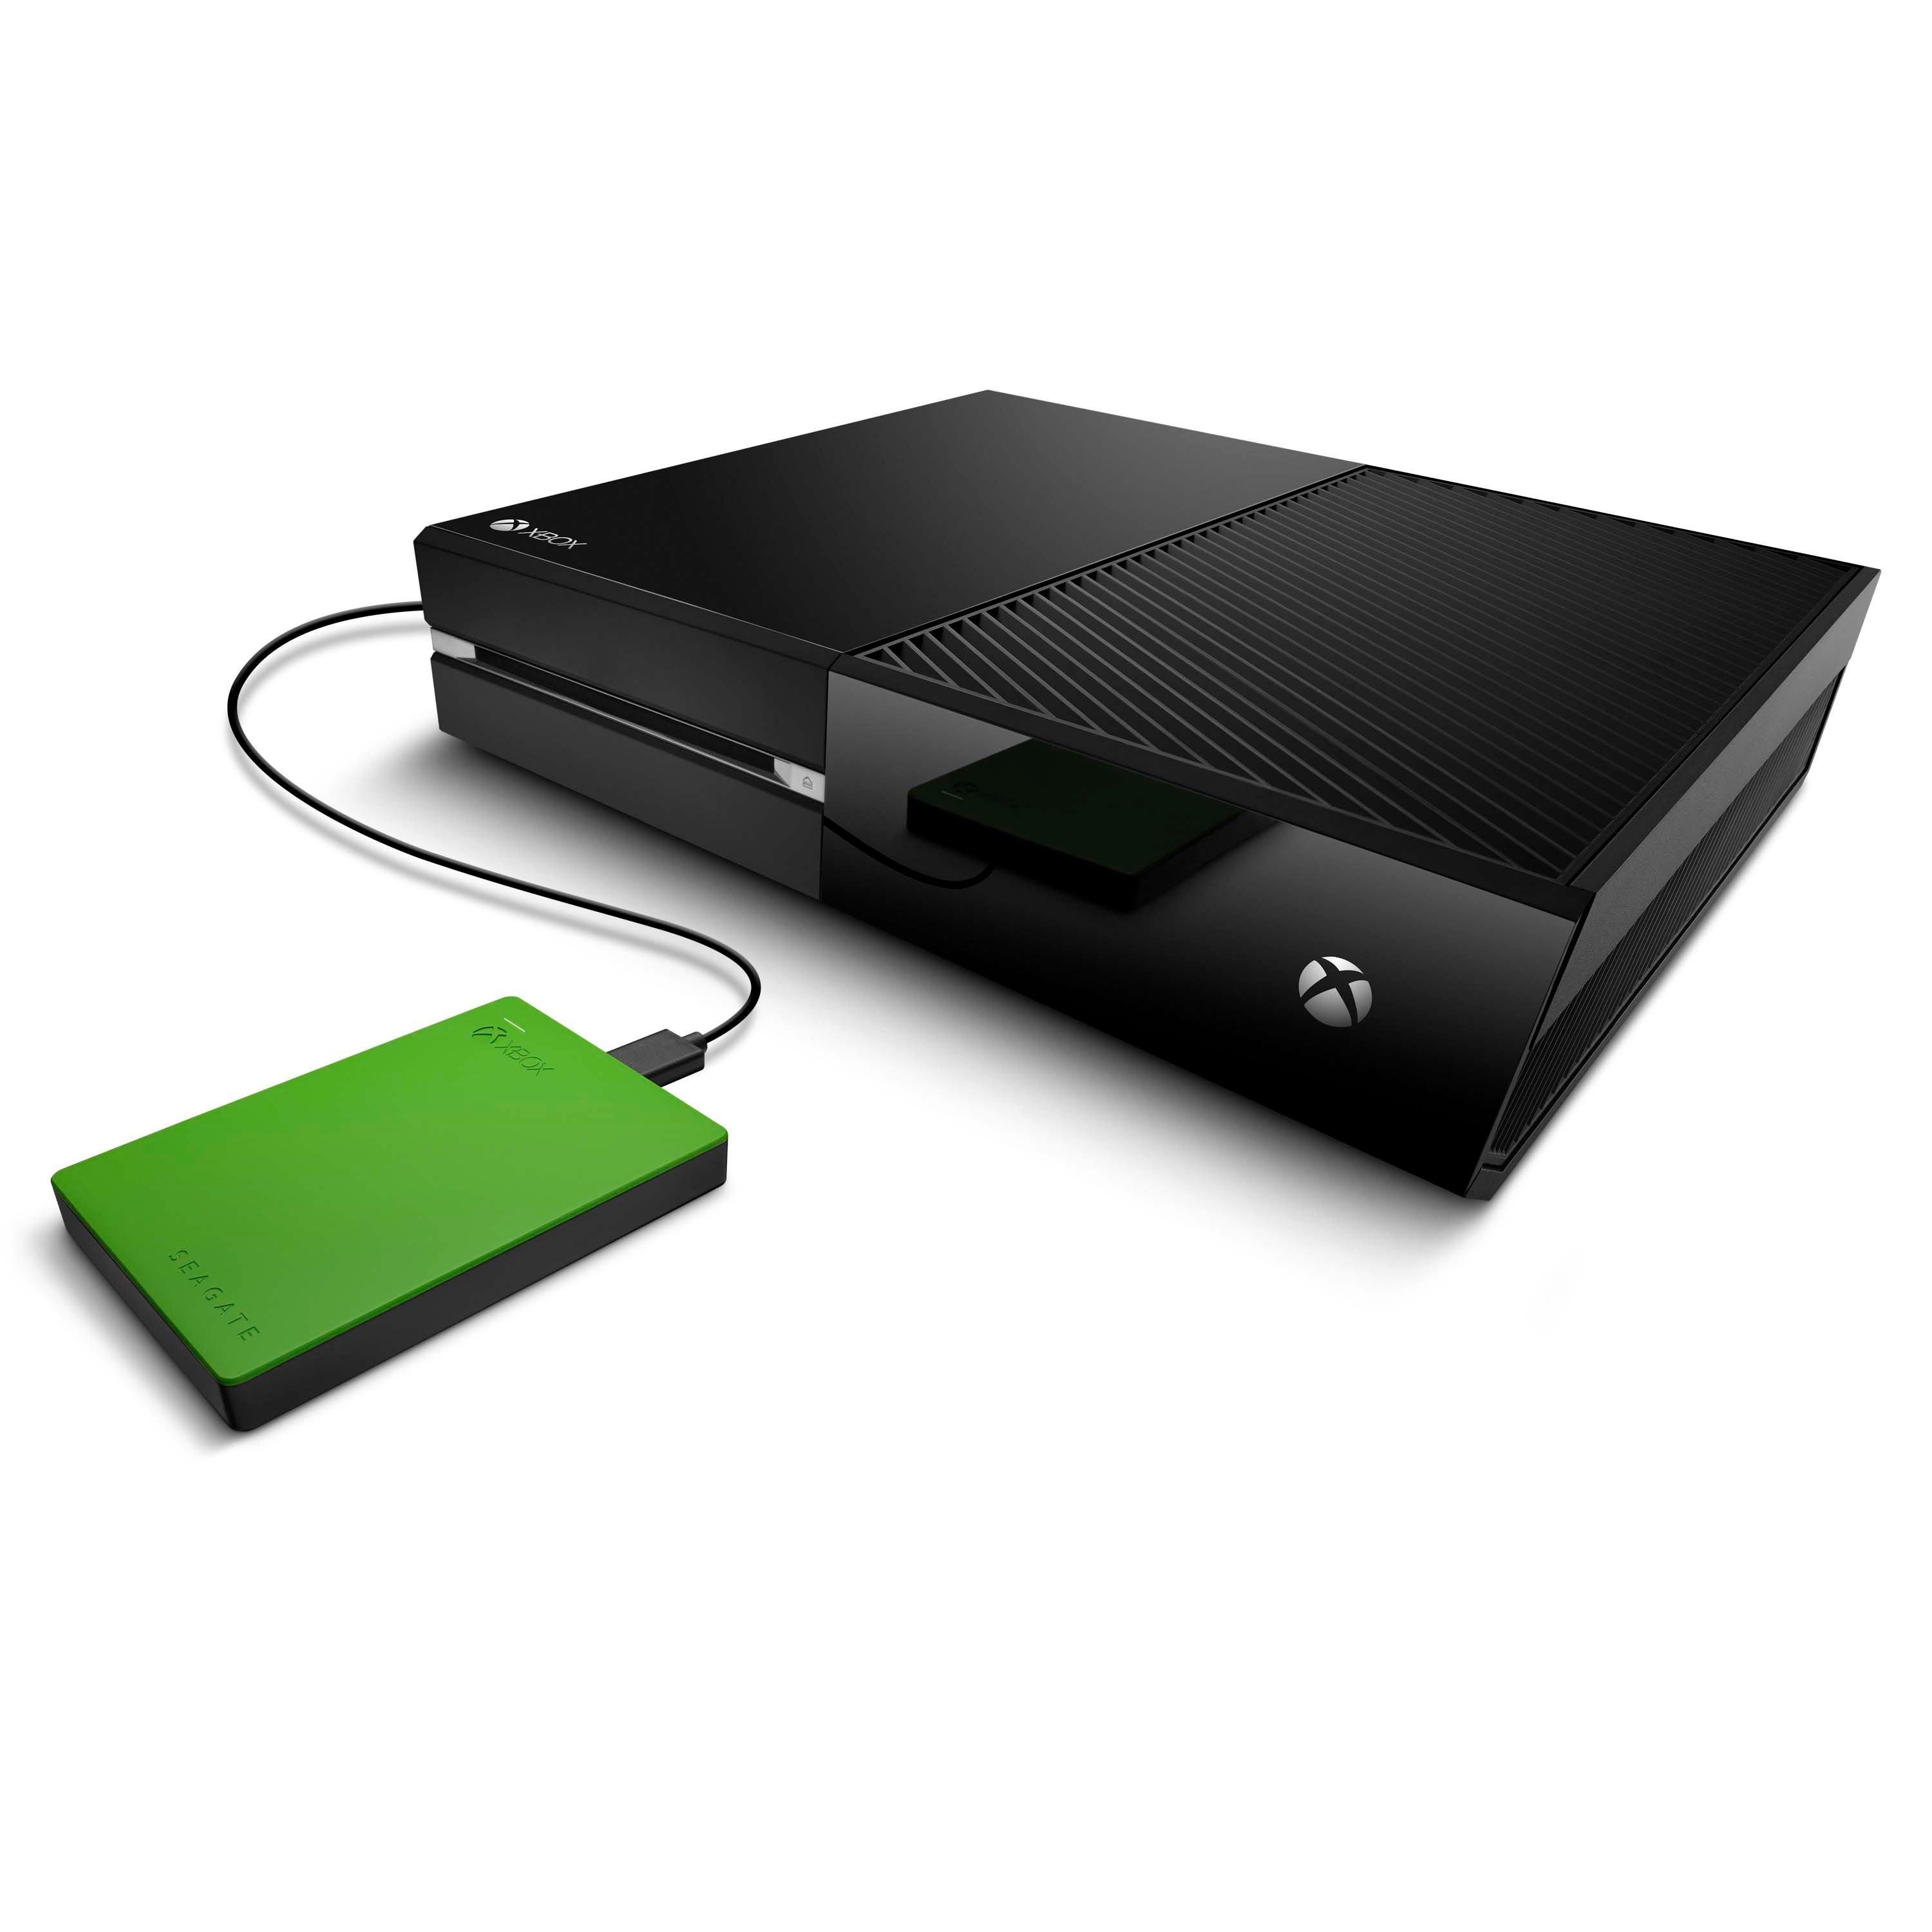 Seagate 2TB External Game Drive for PlayStation | GameStop